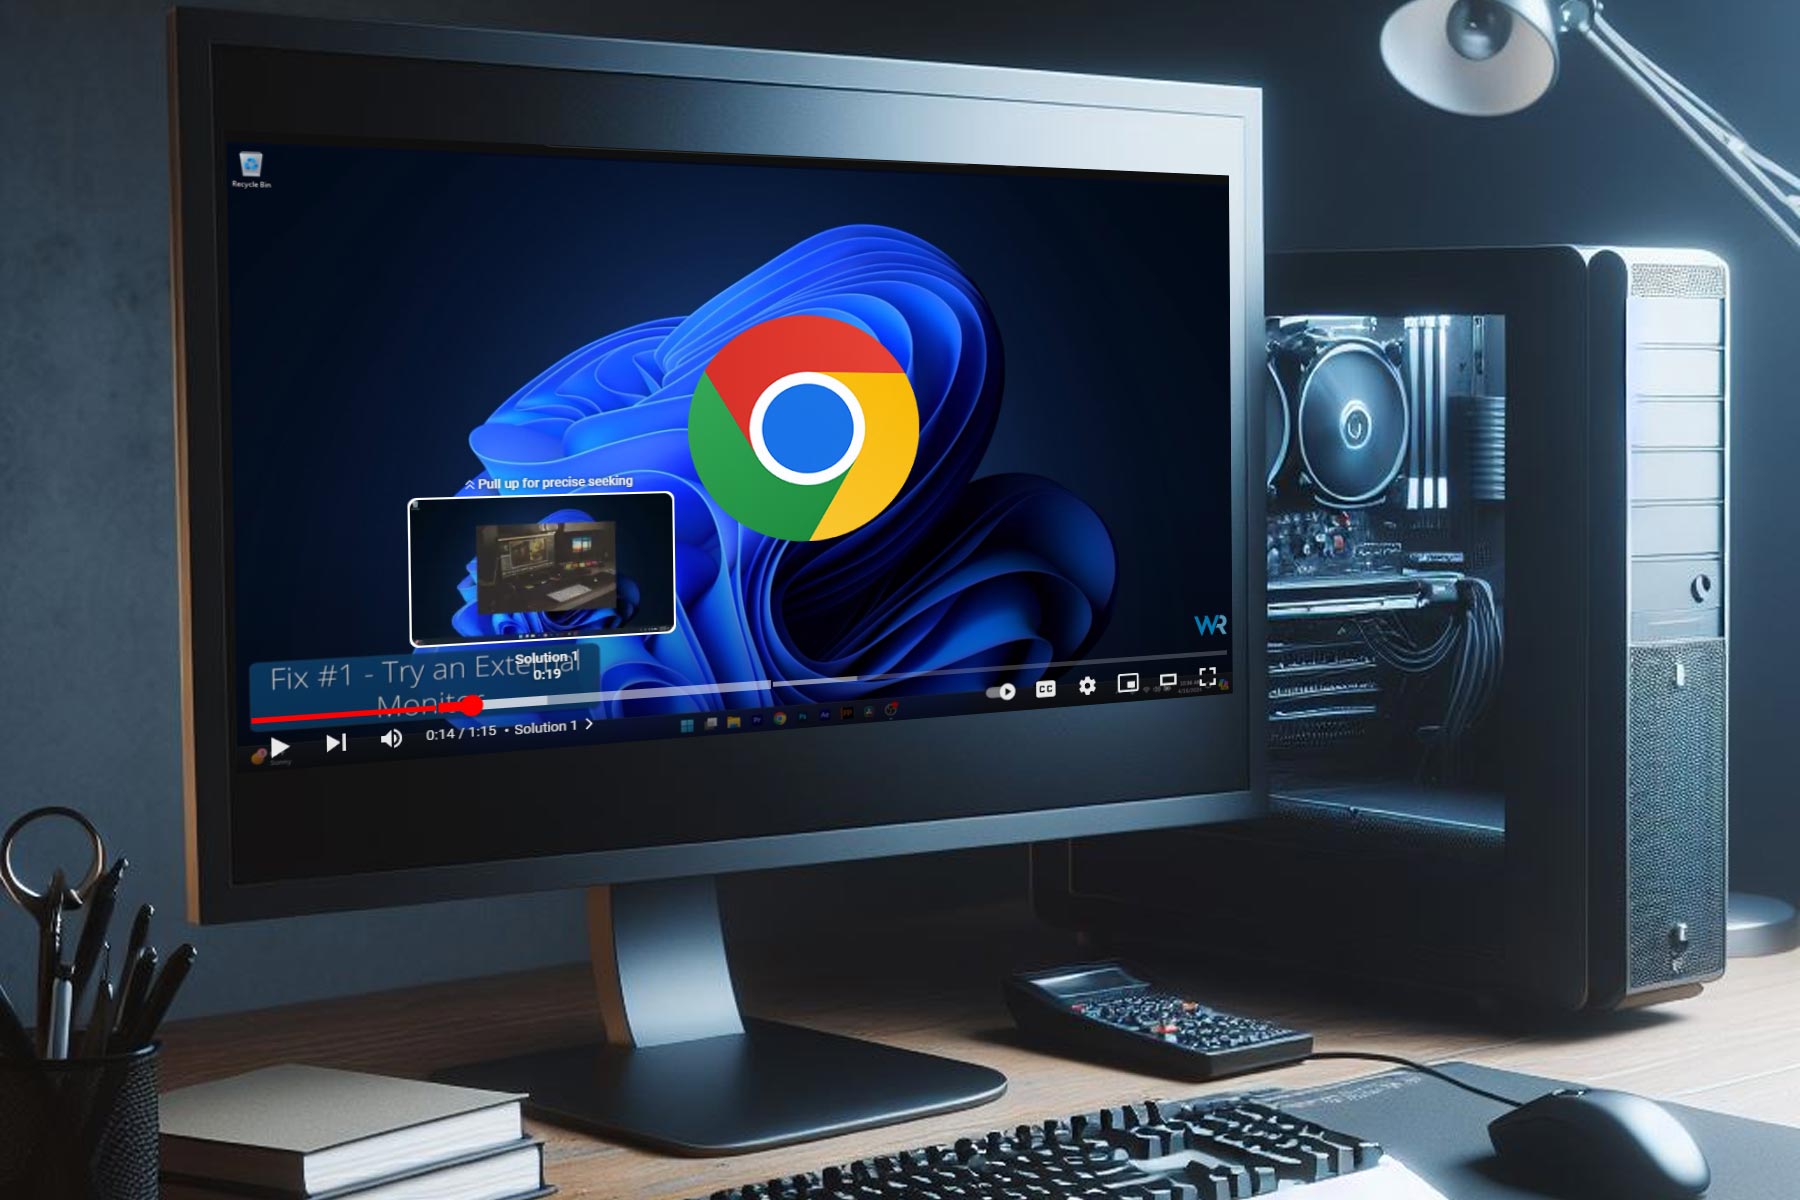 chrome video chapter native